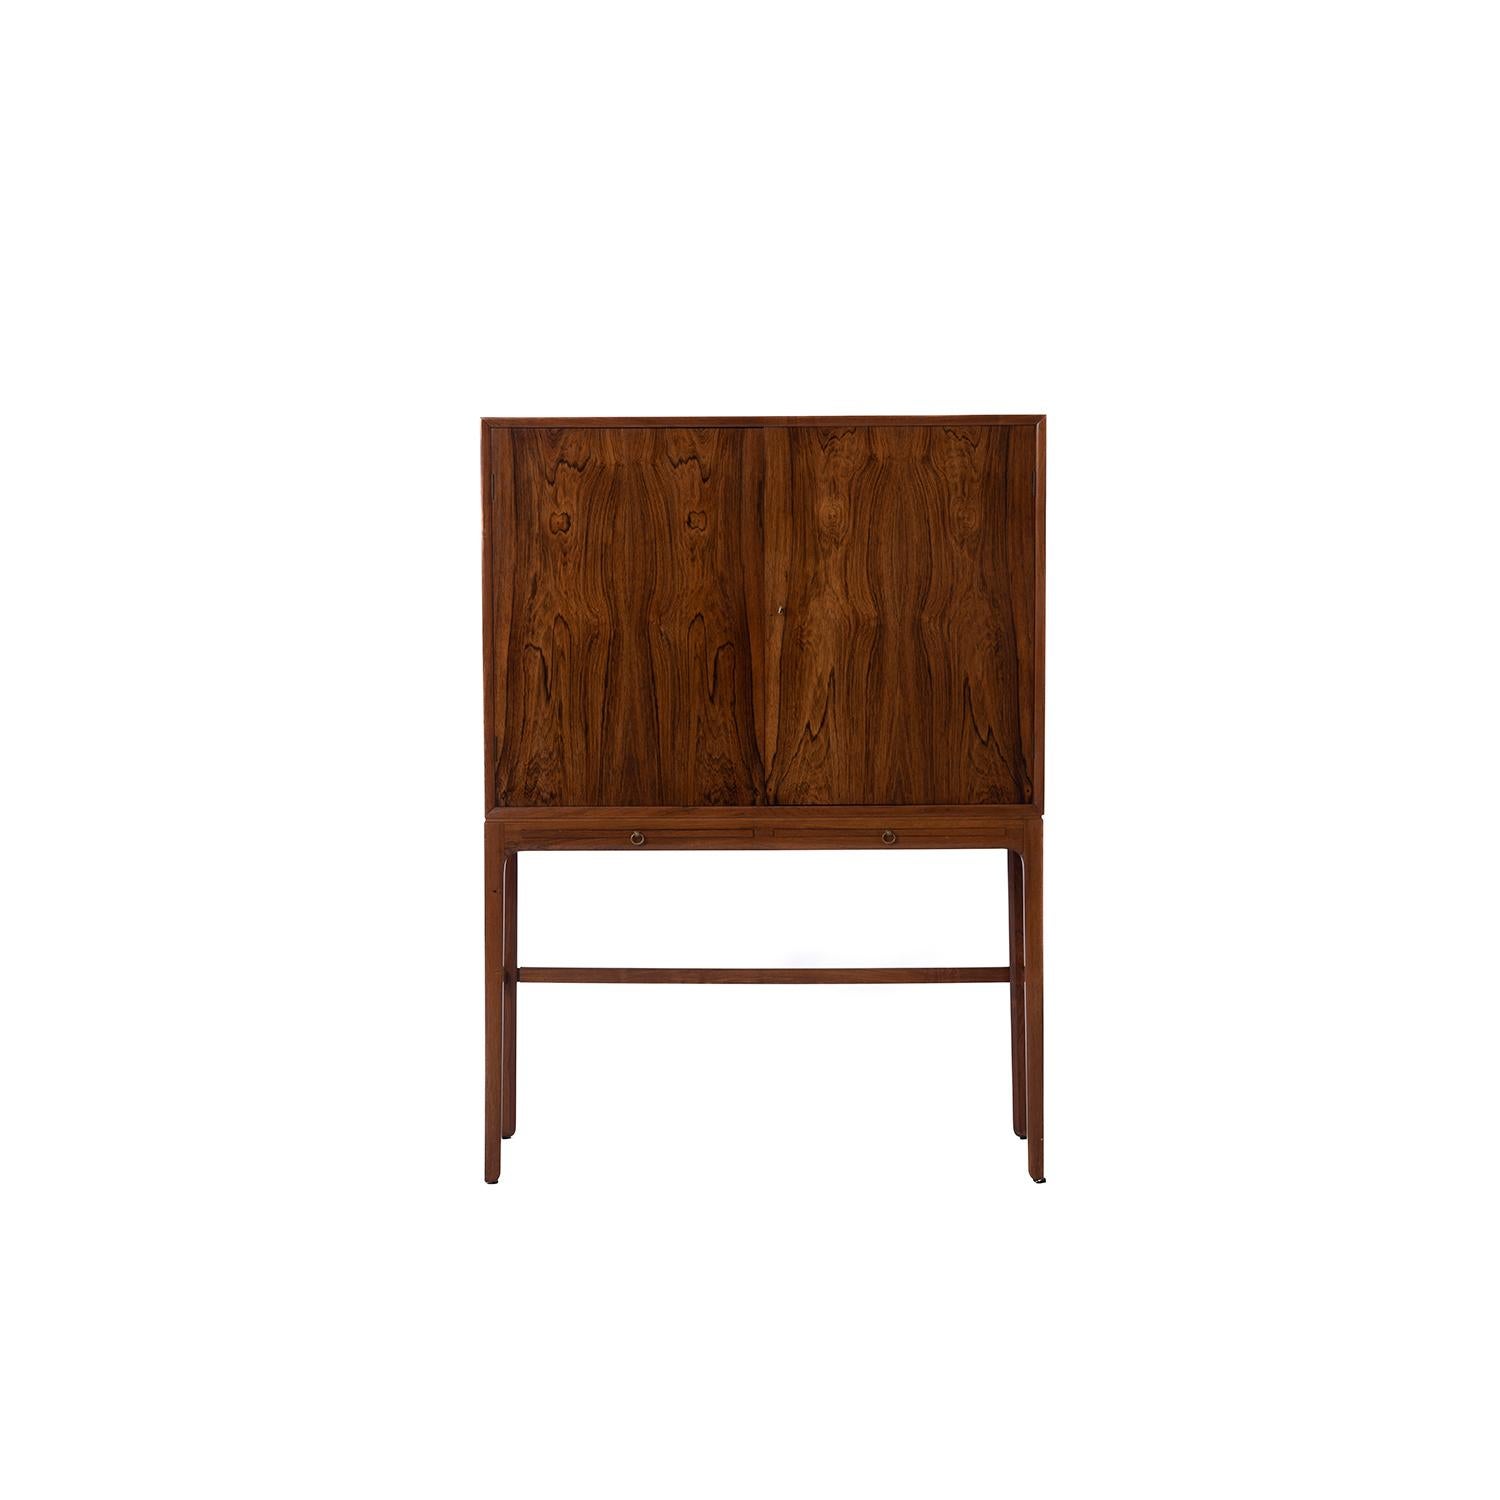 A beautiful and hard to find Rosewood occasional cabinet designed by Ole Wanscher. Tall and elegant this piece features more traditional Scandinavian cabinet making techniques and design. This piece will be cleaned up upon purchase.

Professional,